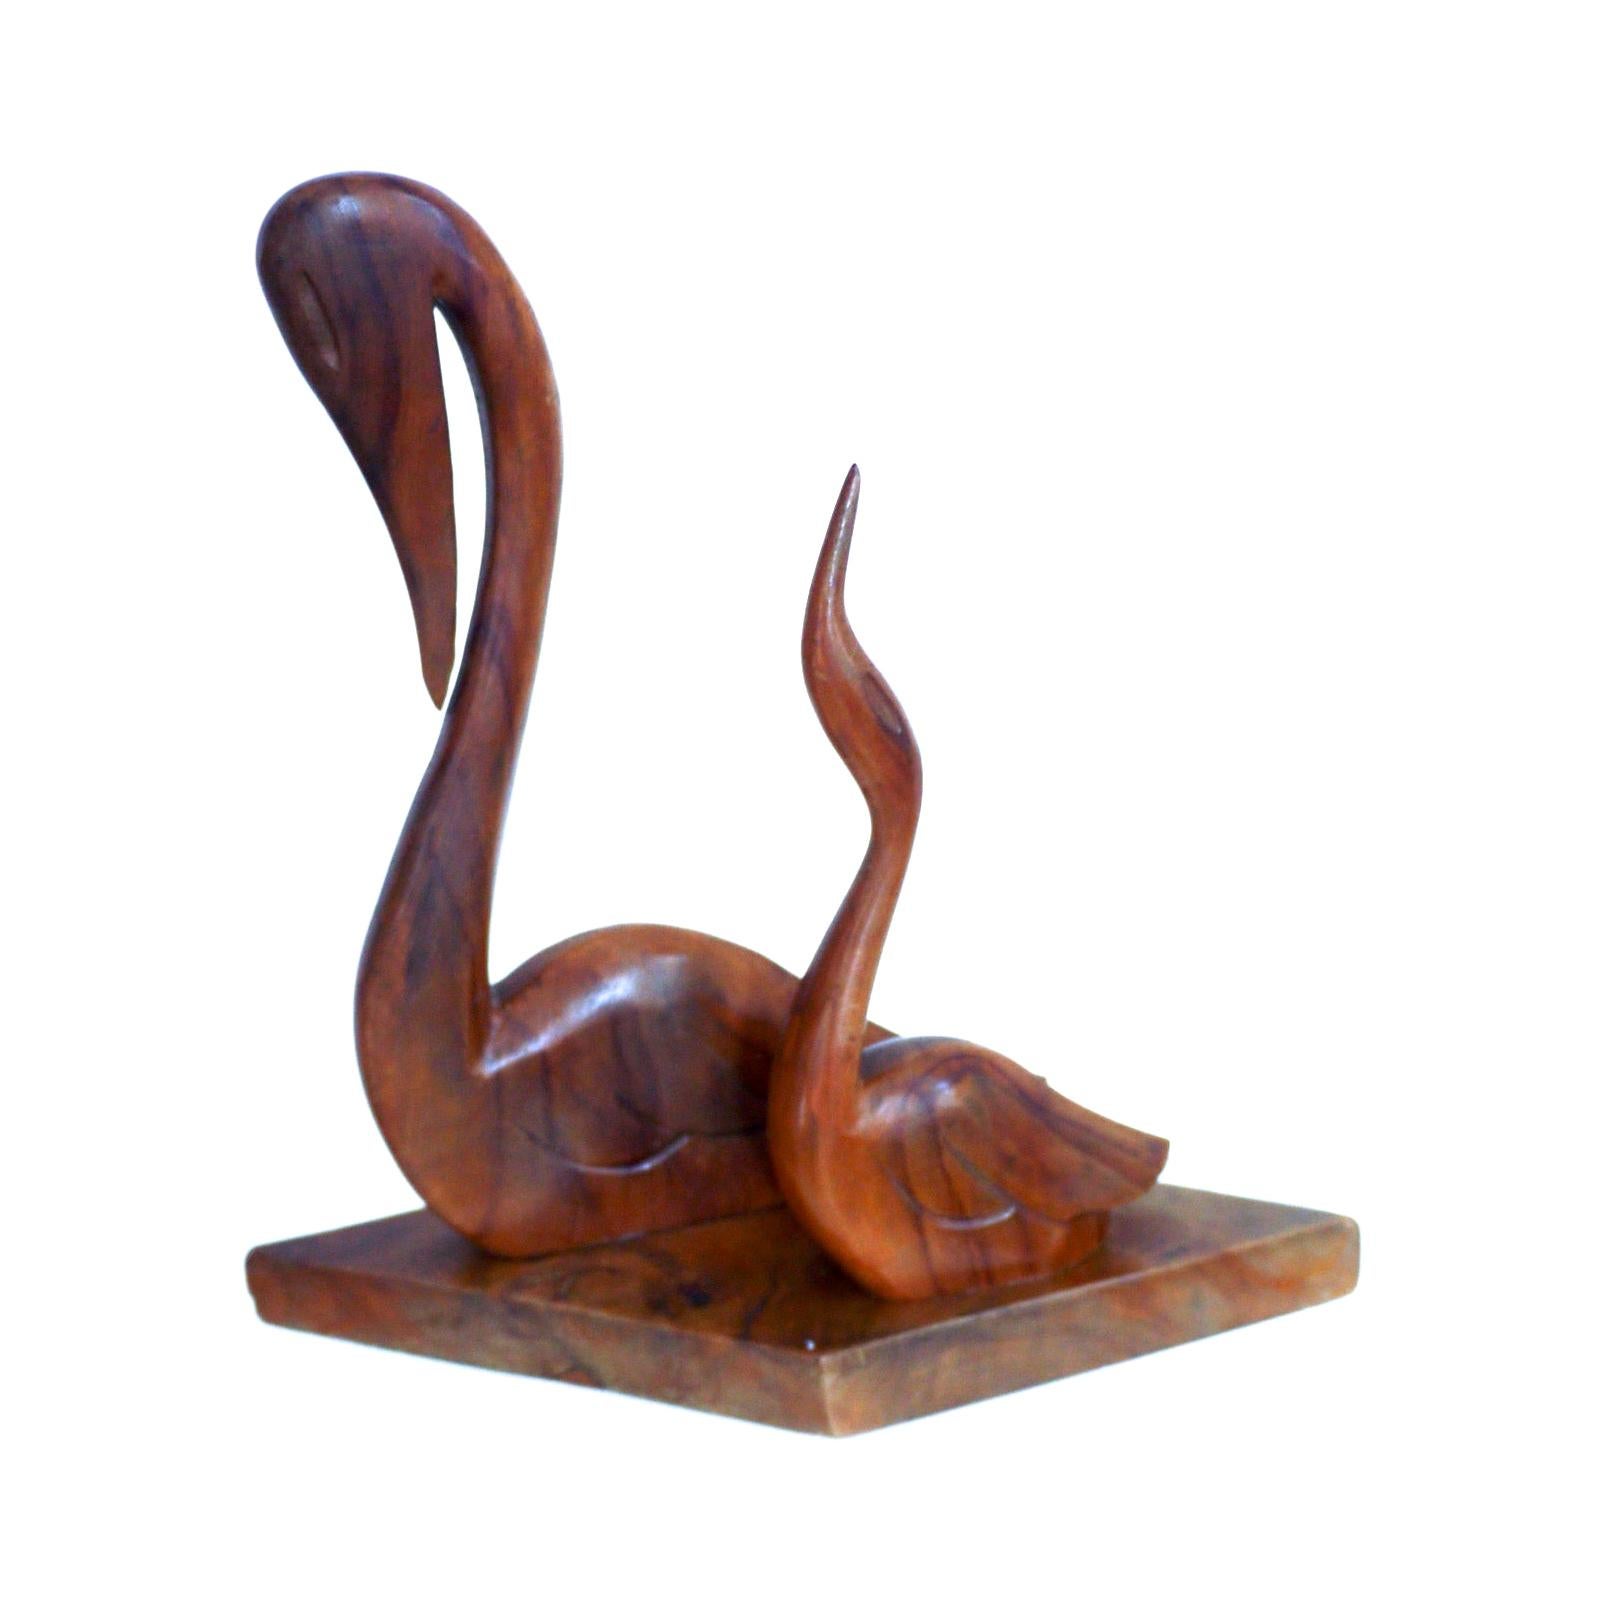 Scandinavian Modern Hand Carved Sculpture, Pair of Swans 1955 in Polished Teak For Sale